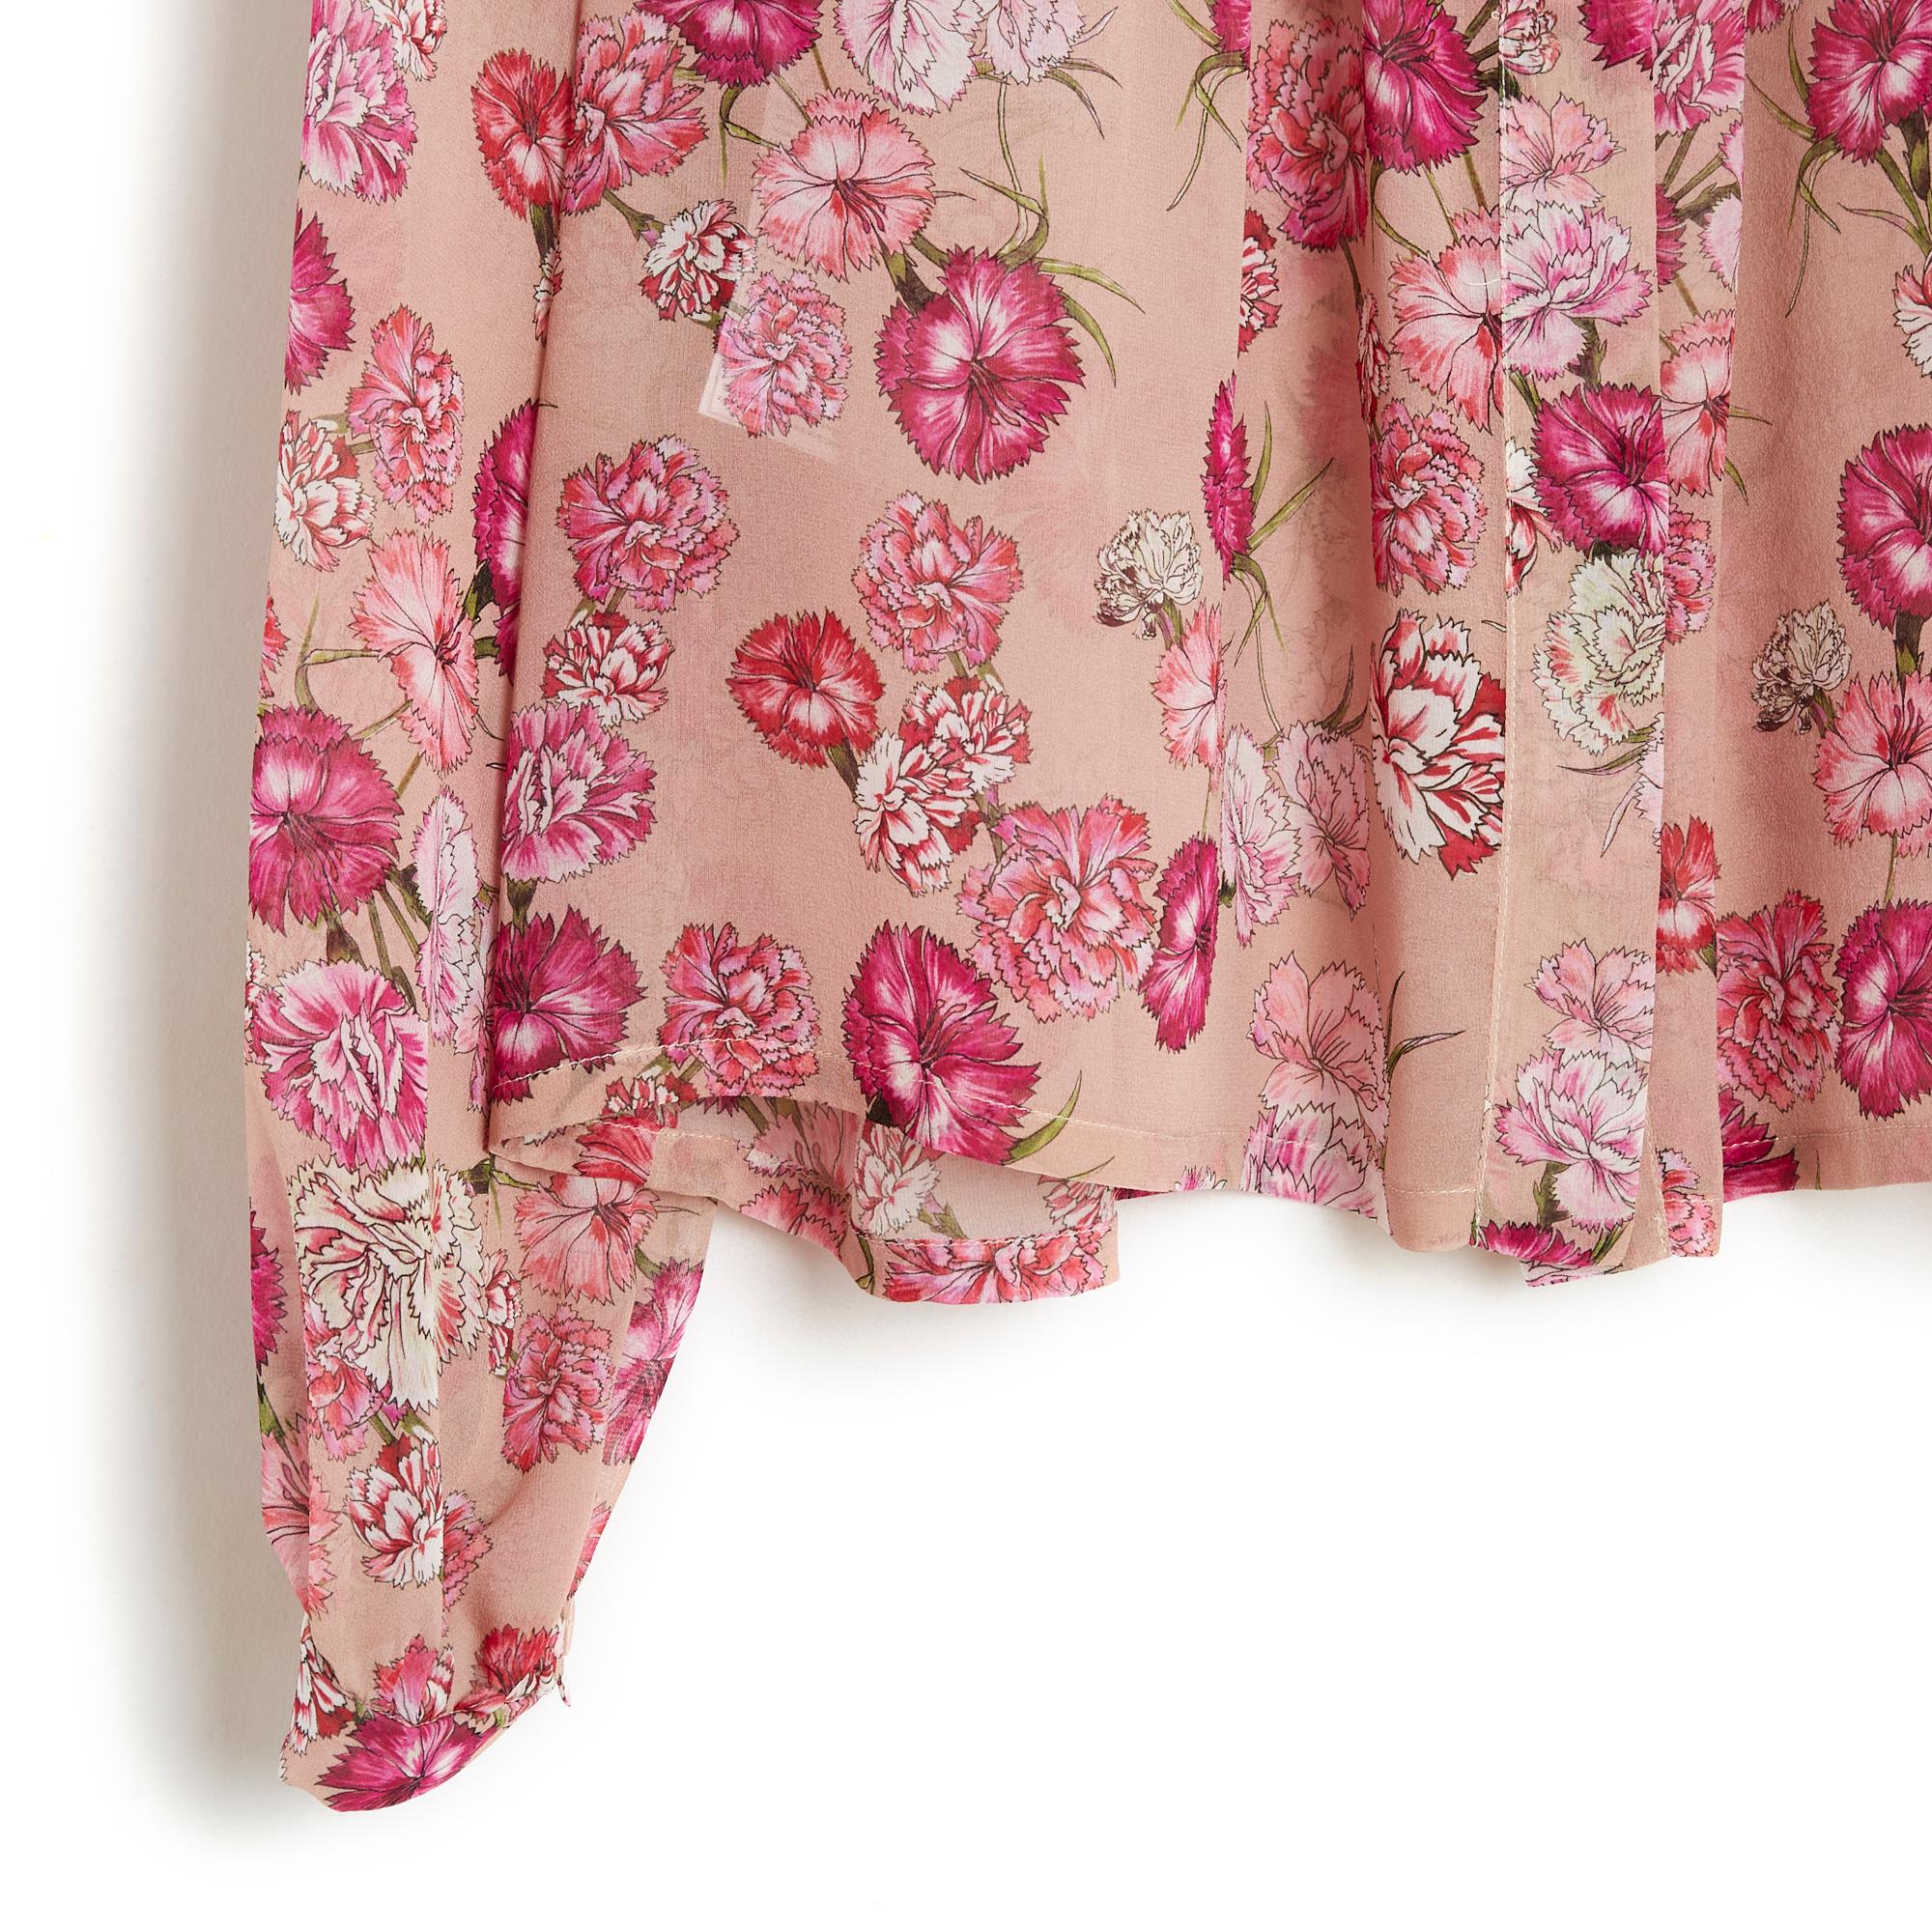 Top Giambattista Valli blouse in slightly transparent tea pink silk crepe with carnation pattern in different shades of pink, peter pan collar closed all the way up with hidden buttons, long raglan sleeves slightly puffed at the wrist, closed with a